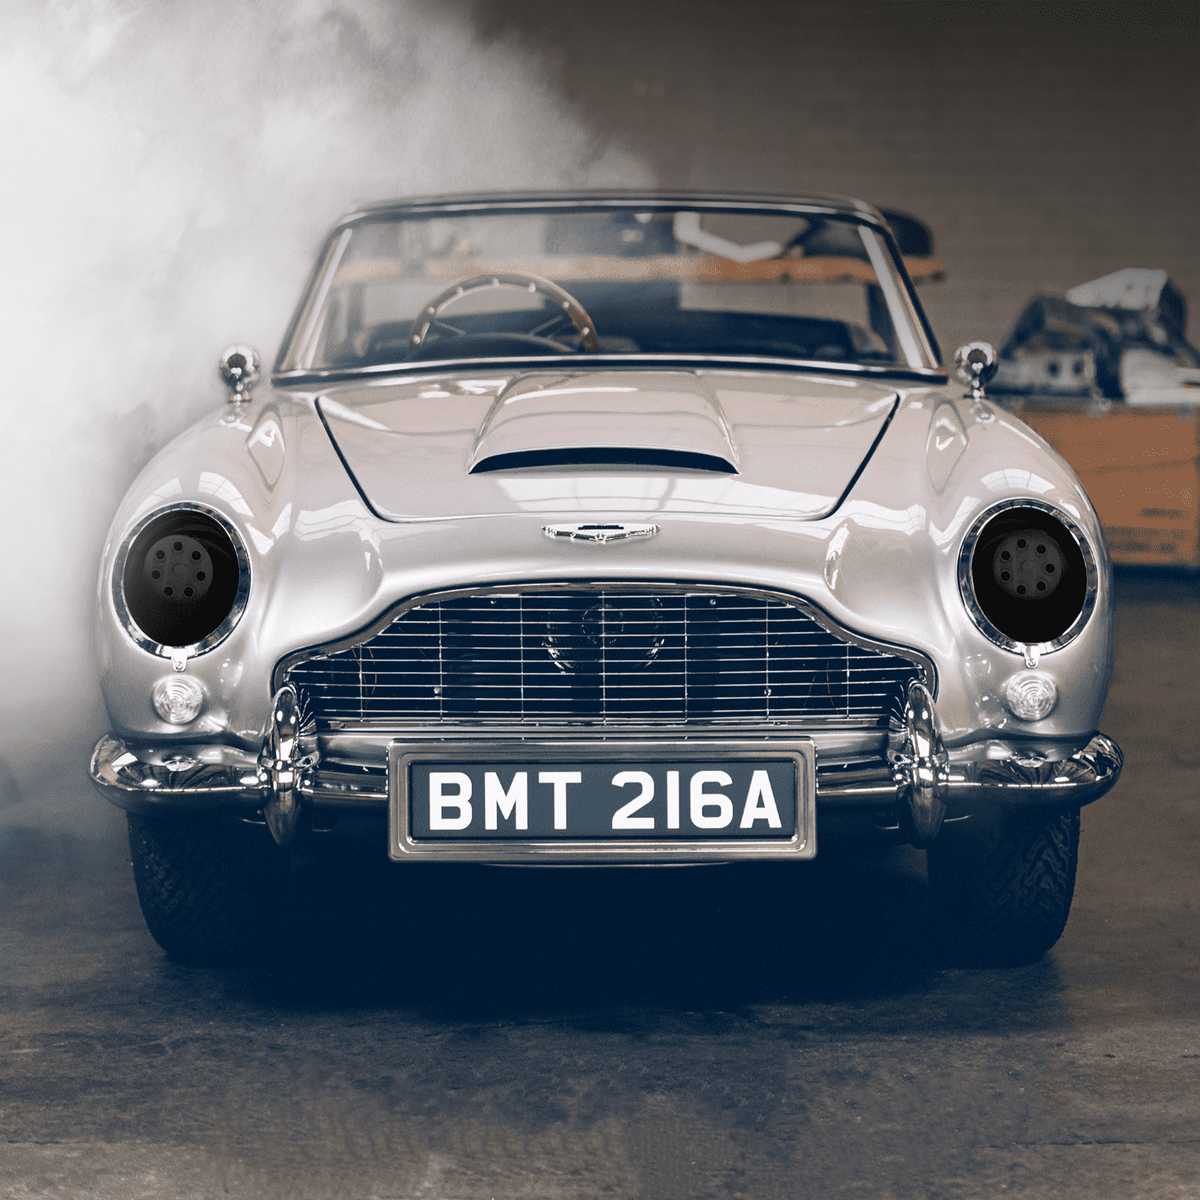 007 James Bond Aston Martin DB5 Junior Car - No Time To Die Edition - By The Little Car Company (DEPOSIT)